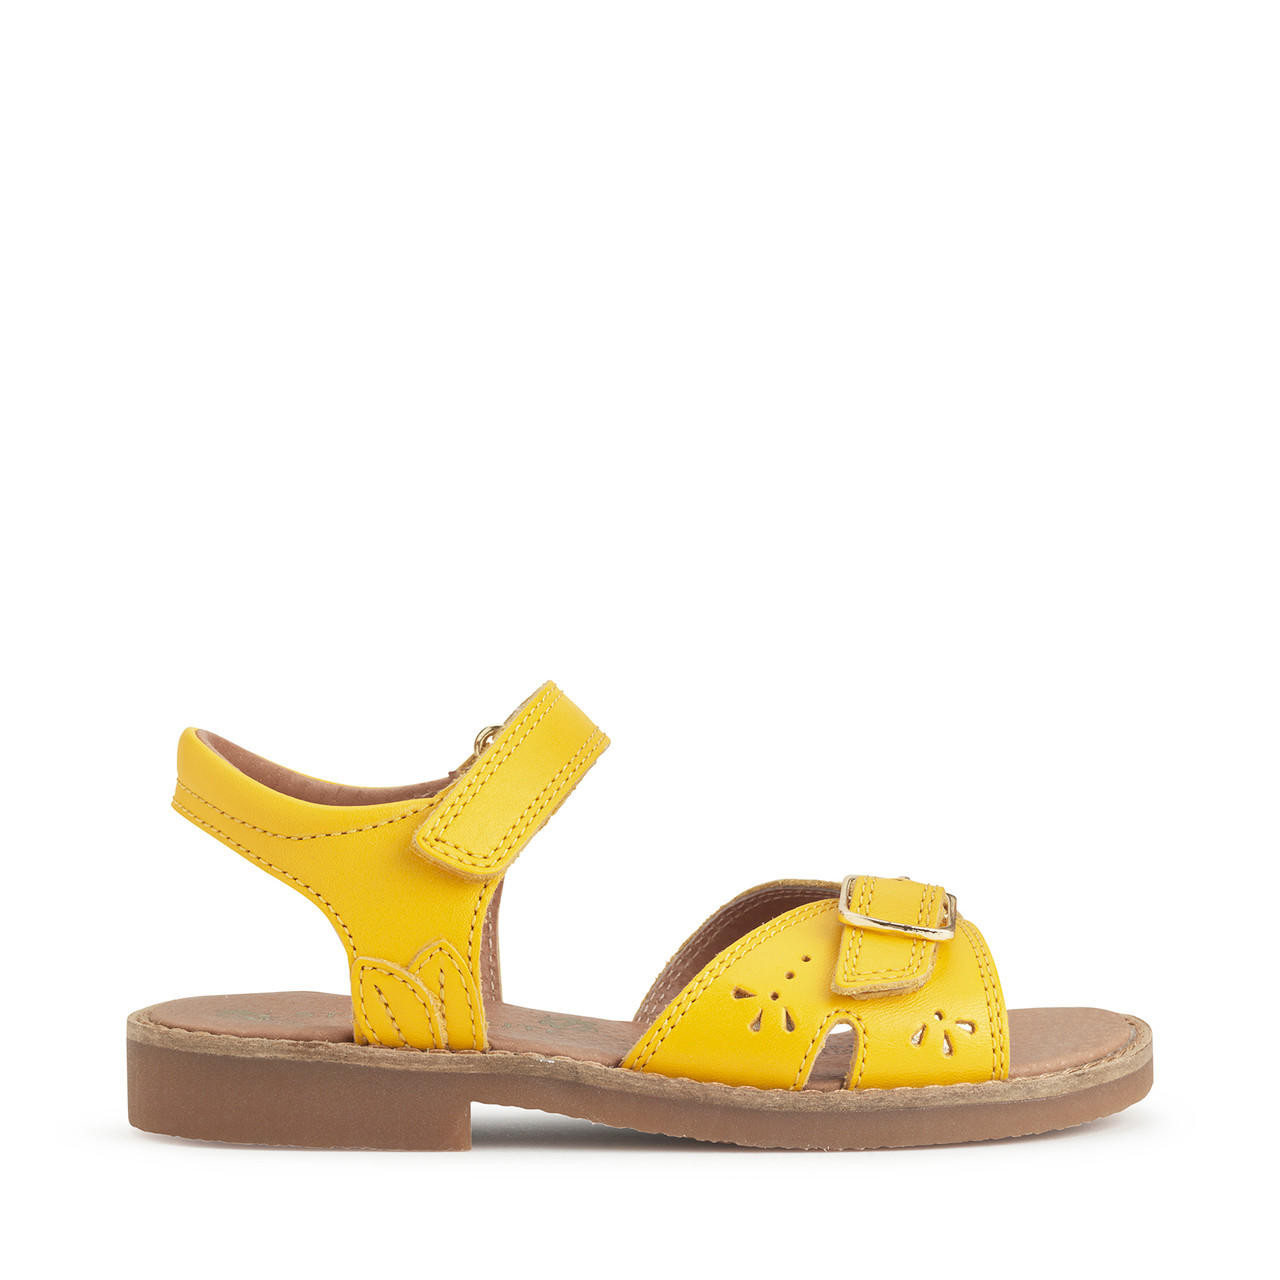 Girls Sandals | Girls Leather Sandals | Start-Rite Shoes